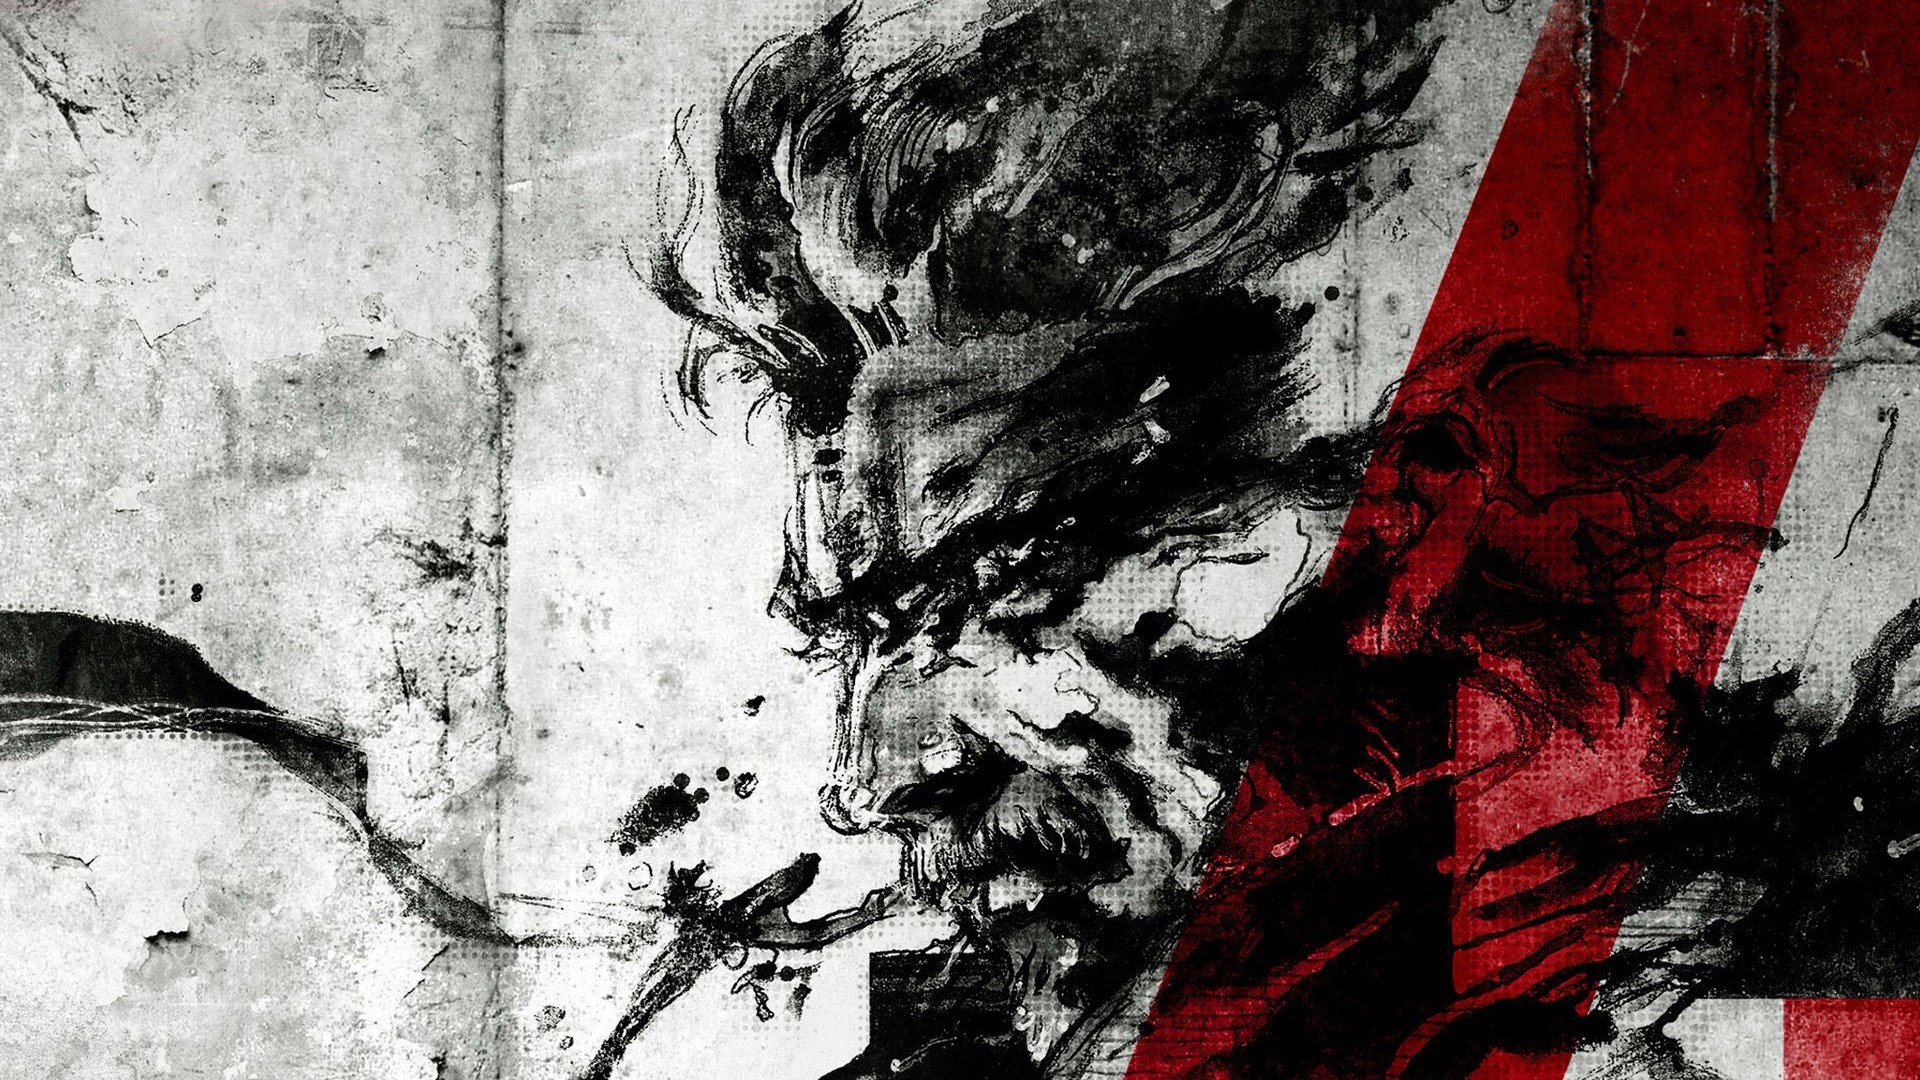 Mgs Backgrounds